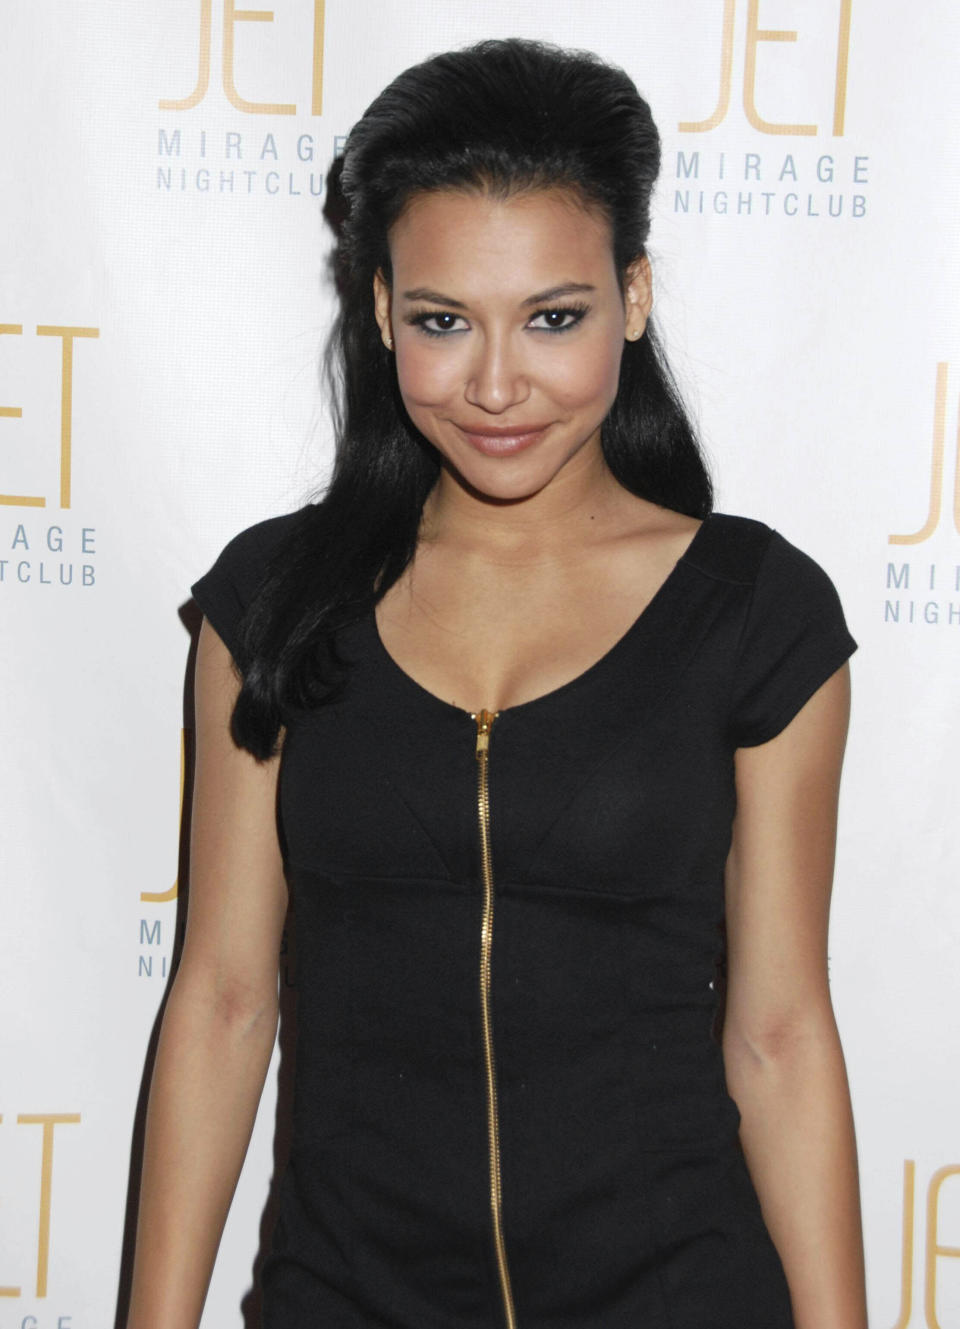 Naya Rivera, best known for her role on "Glee" has gone missing and is presumed to be dead after her 4-year old son was found adrift on a boat in Lake Piru in Ventura County, CA. STAR MAX File Photo: 2/6/10. (Las Vegas, Nevada)